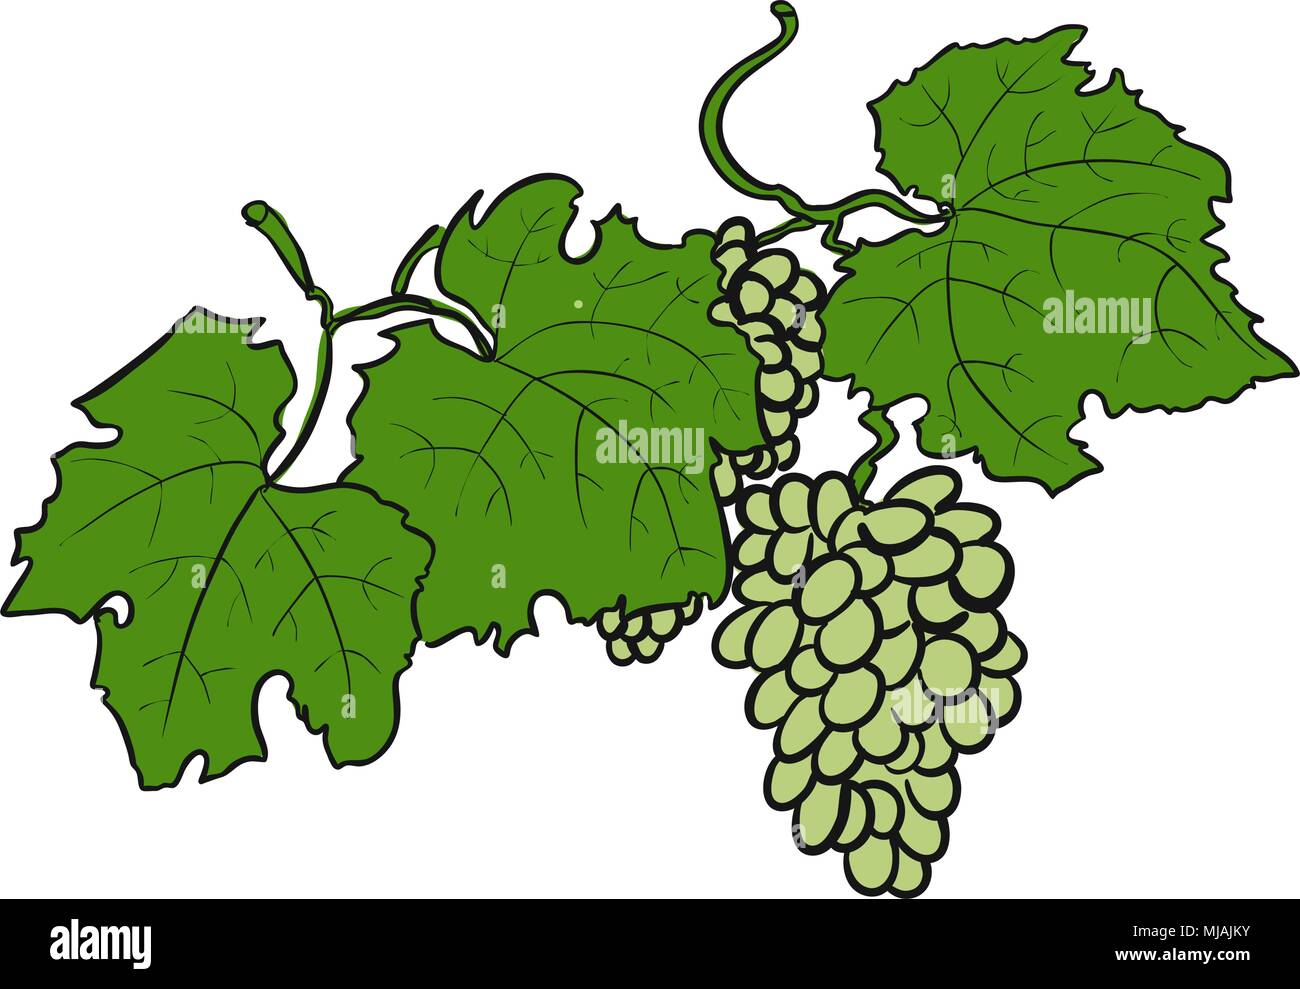 Green Grapes with Leaves, Sketched Hand drawn Vector Artwork Stock Vector